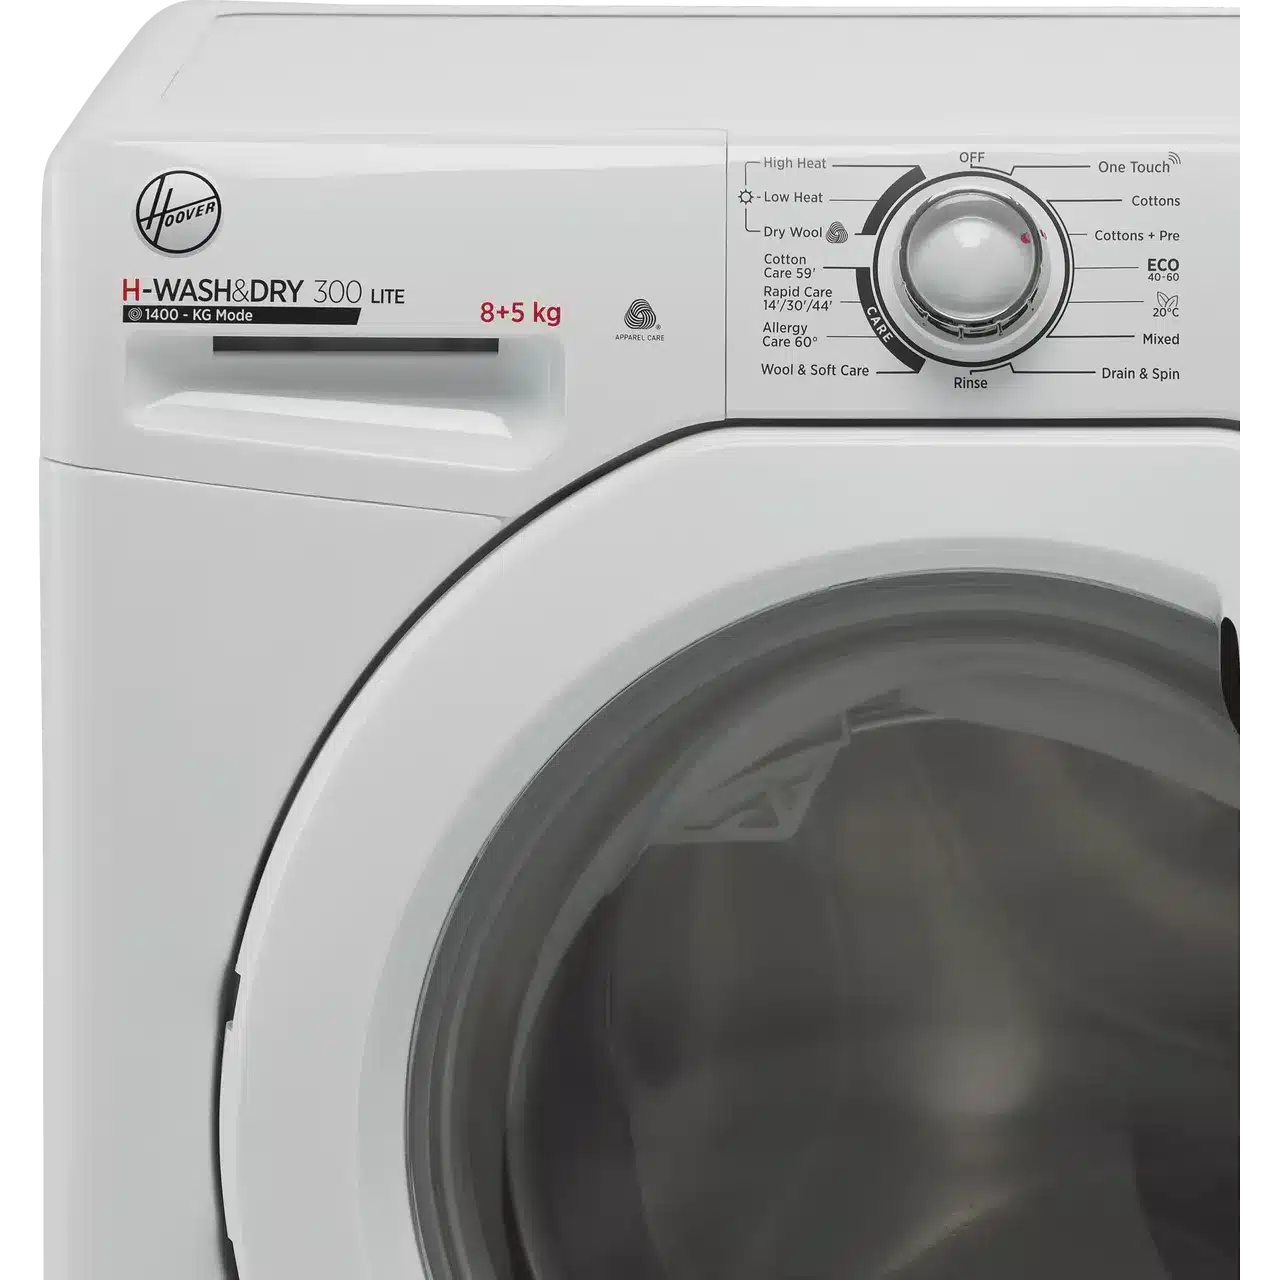 Hoover H-WASH&DRY 300 H3D4852DE 8Kg / 5Kg Washer Dryer with 1400 rpm White 6093